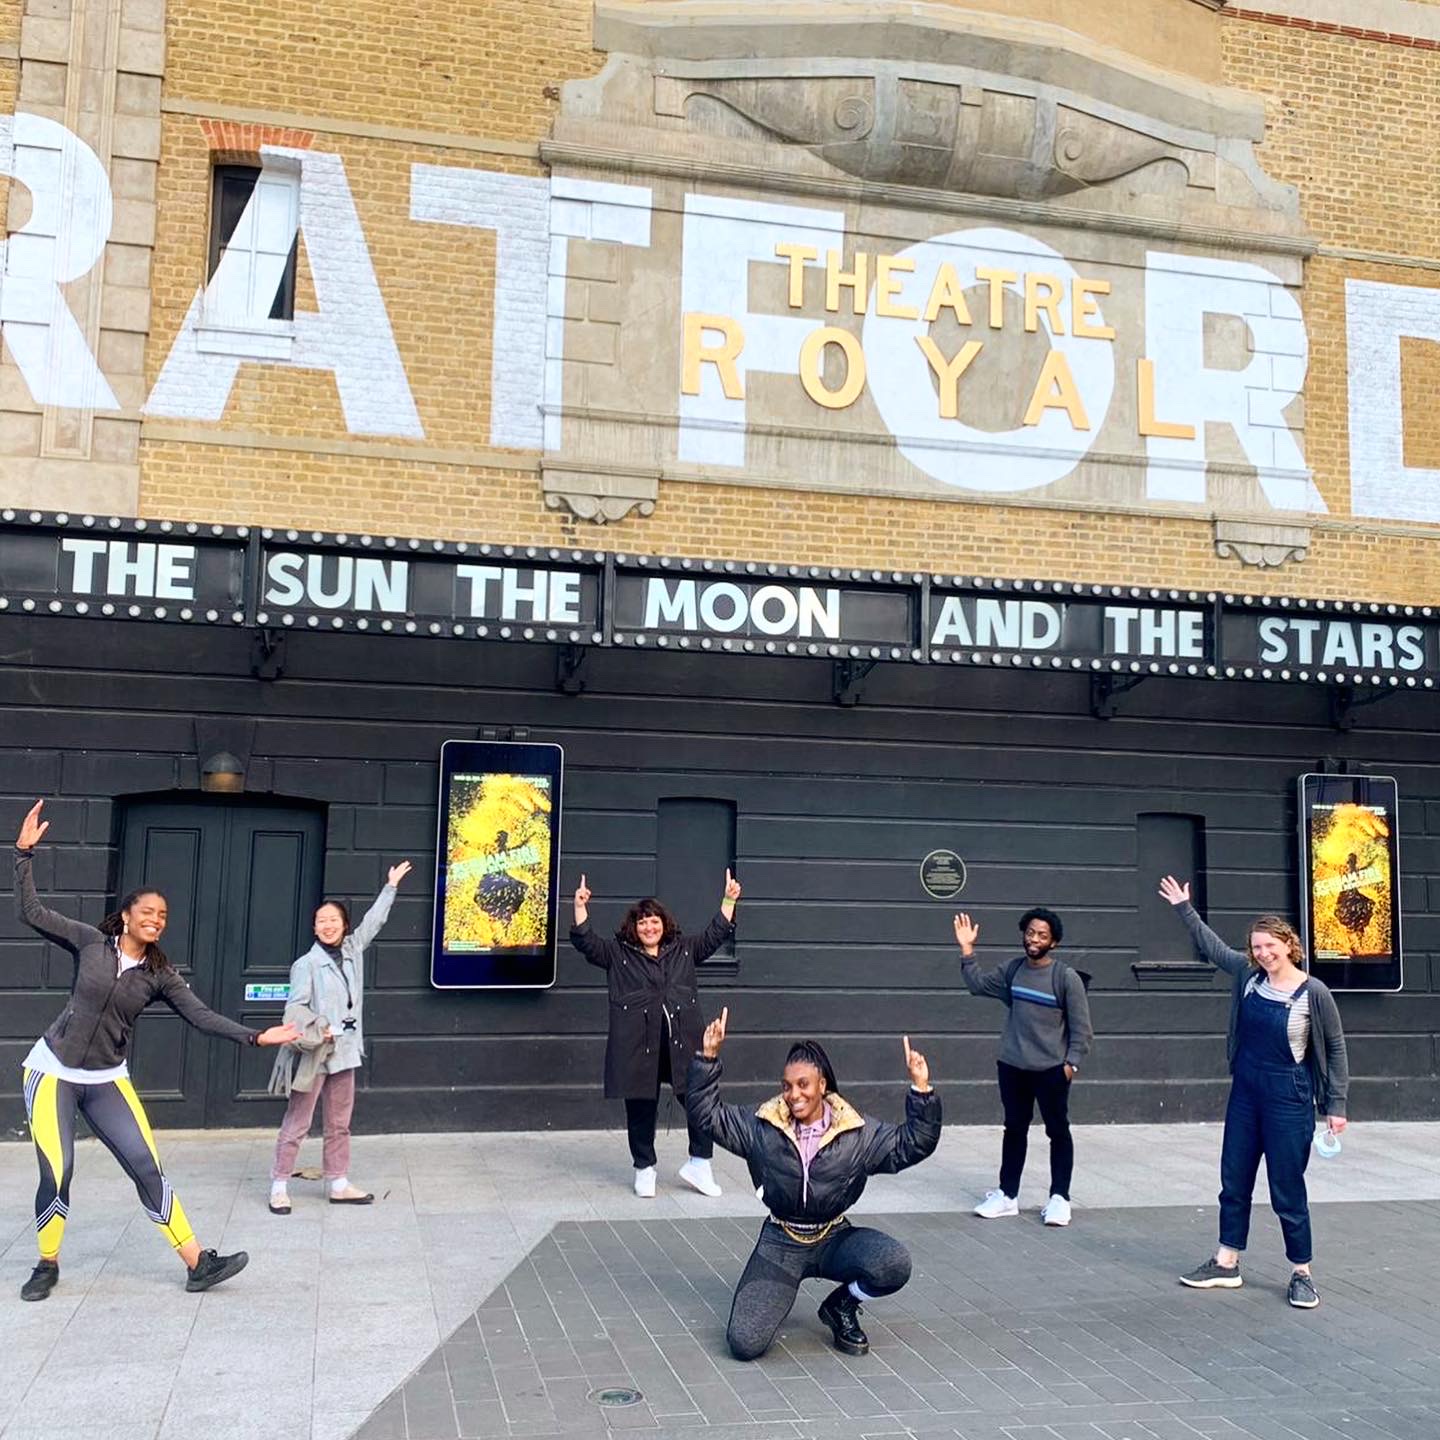 Justina, Ting, Nadia, Kibong, Dipo and Jess standing outside the theatre